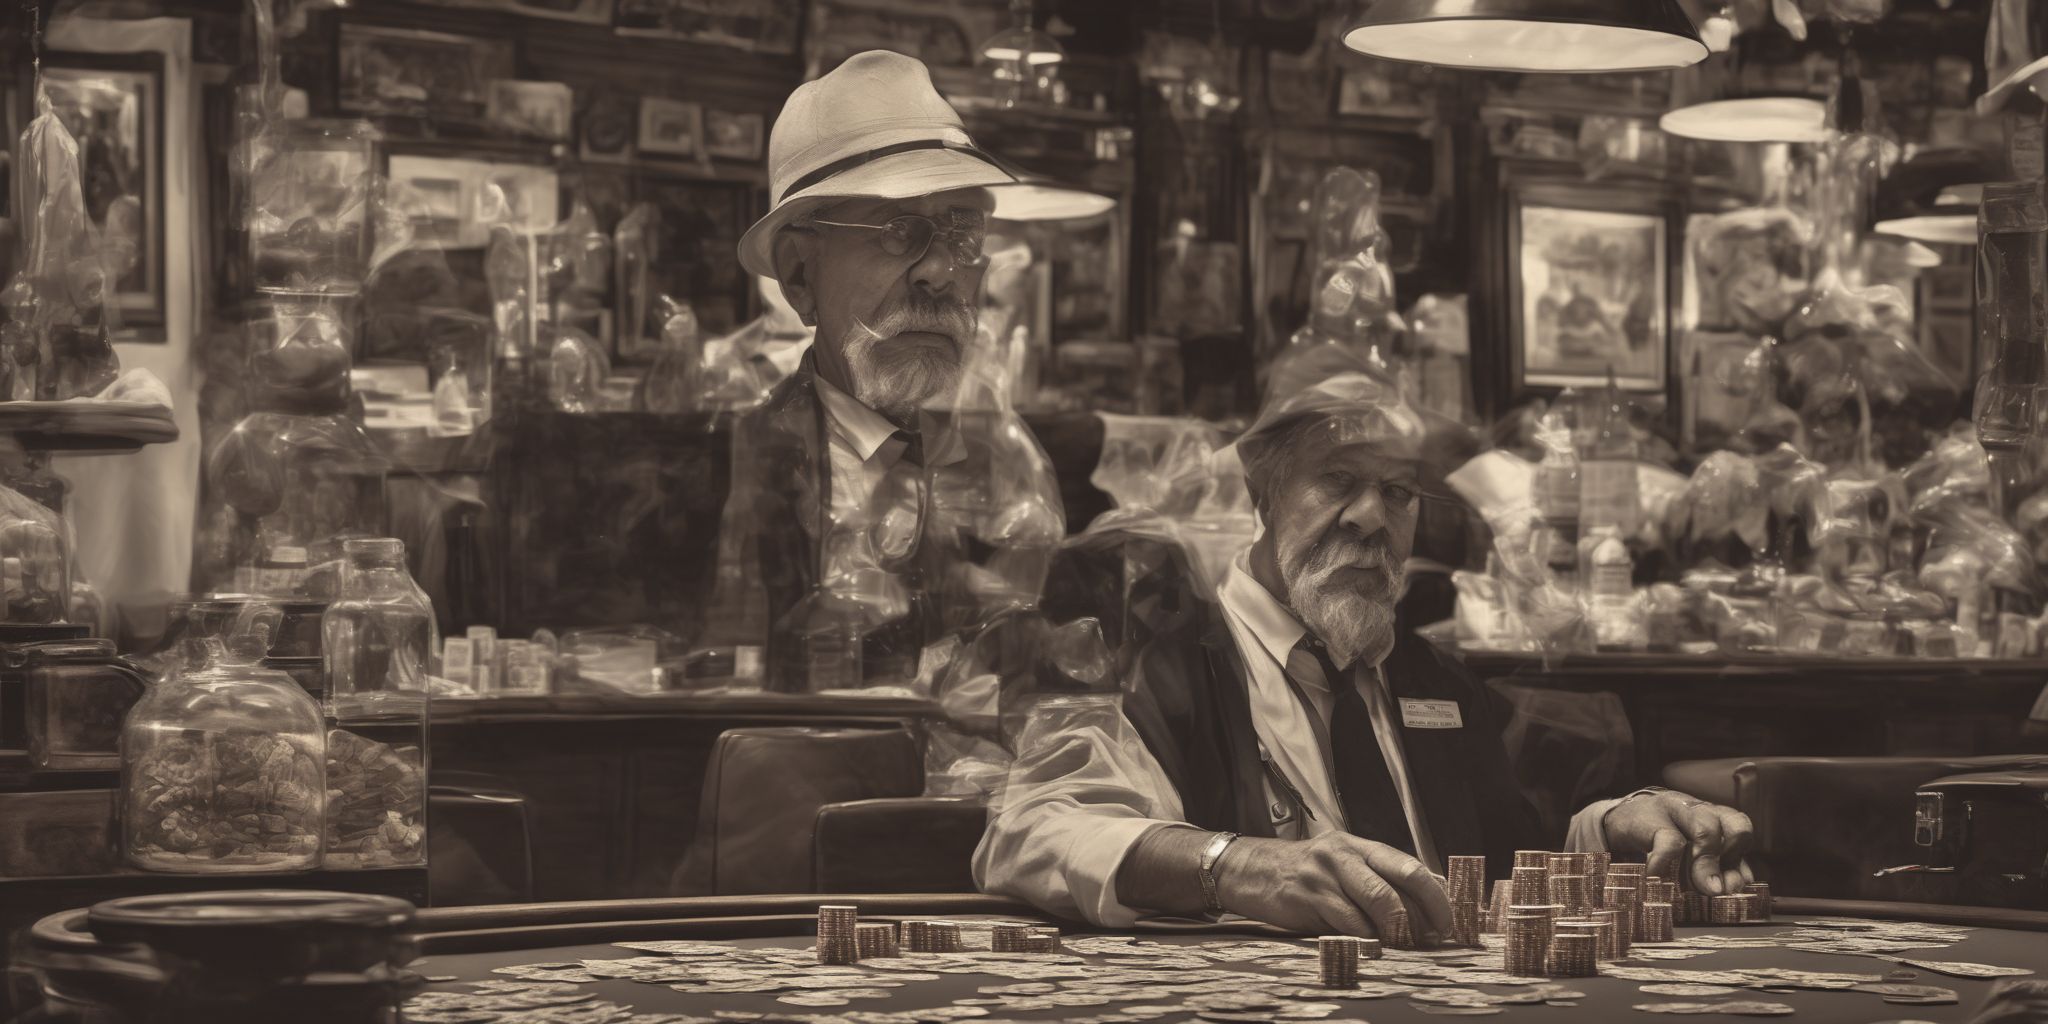 Dealer  in realistic, photographic style